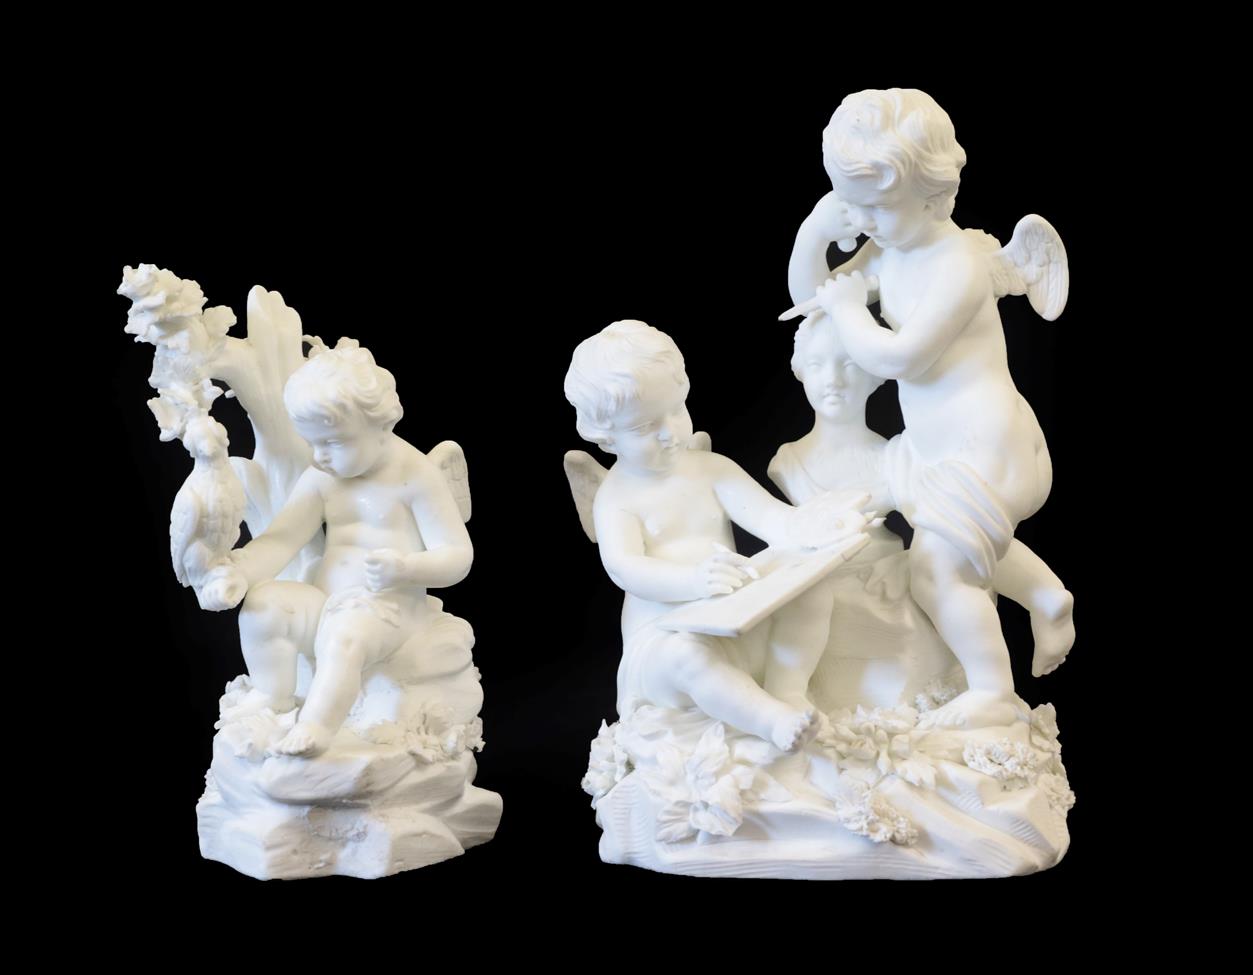 A Derby Bisque Porcelain Figure Group Representing The Arts, circa 1780, modelled as two putti,